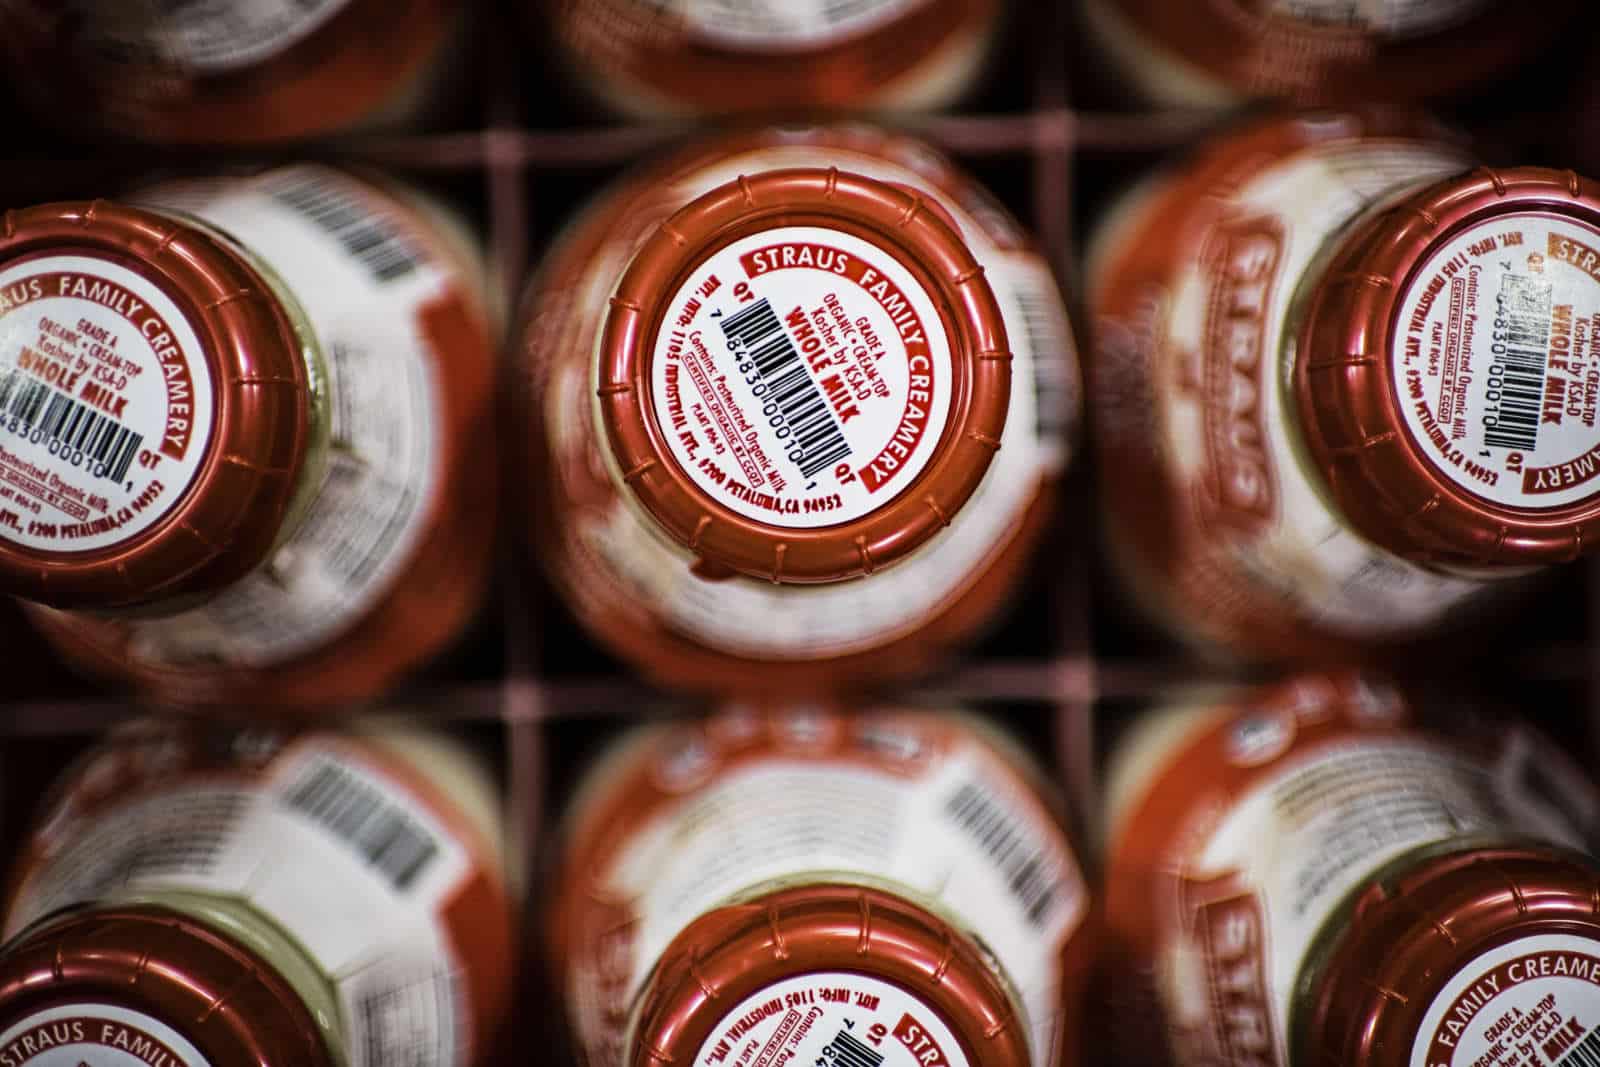 A top-down view of Straus Family Creamery's organic whole milk in glass bottles with shiny red lids.